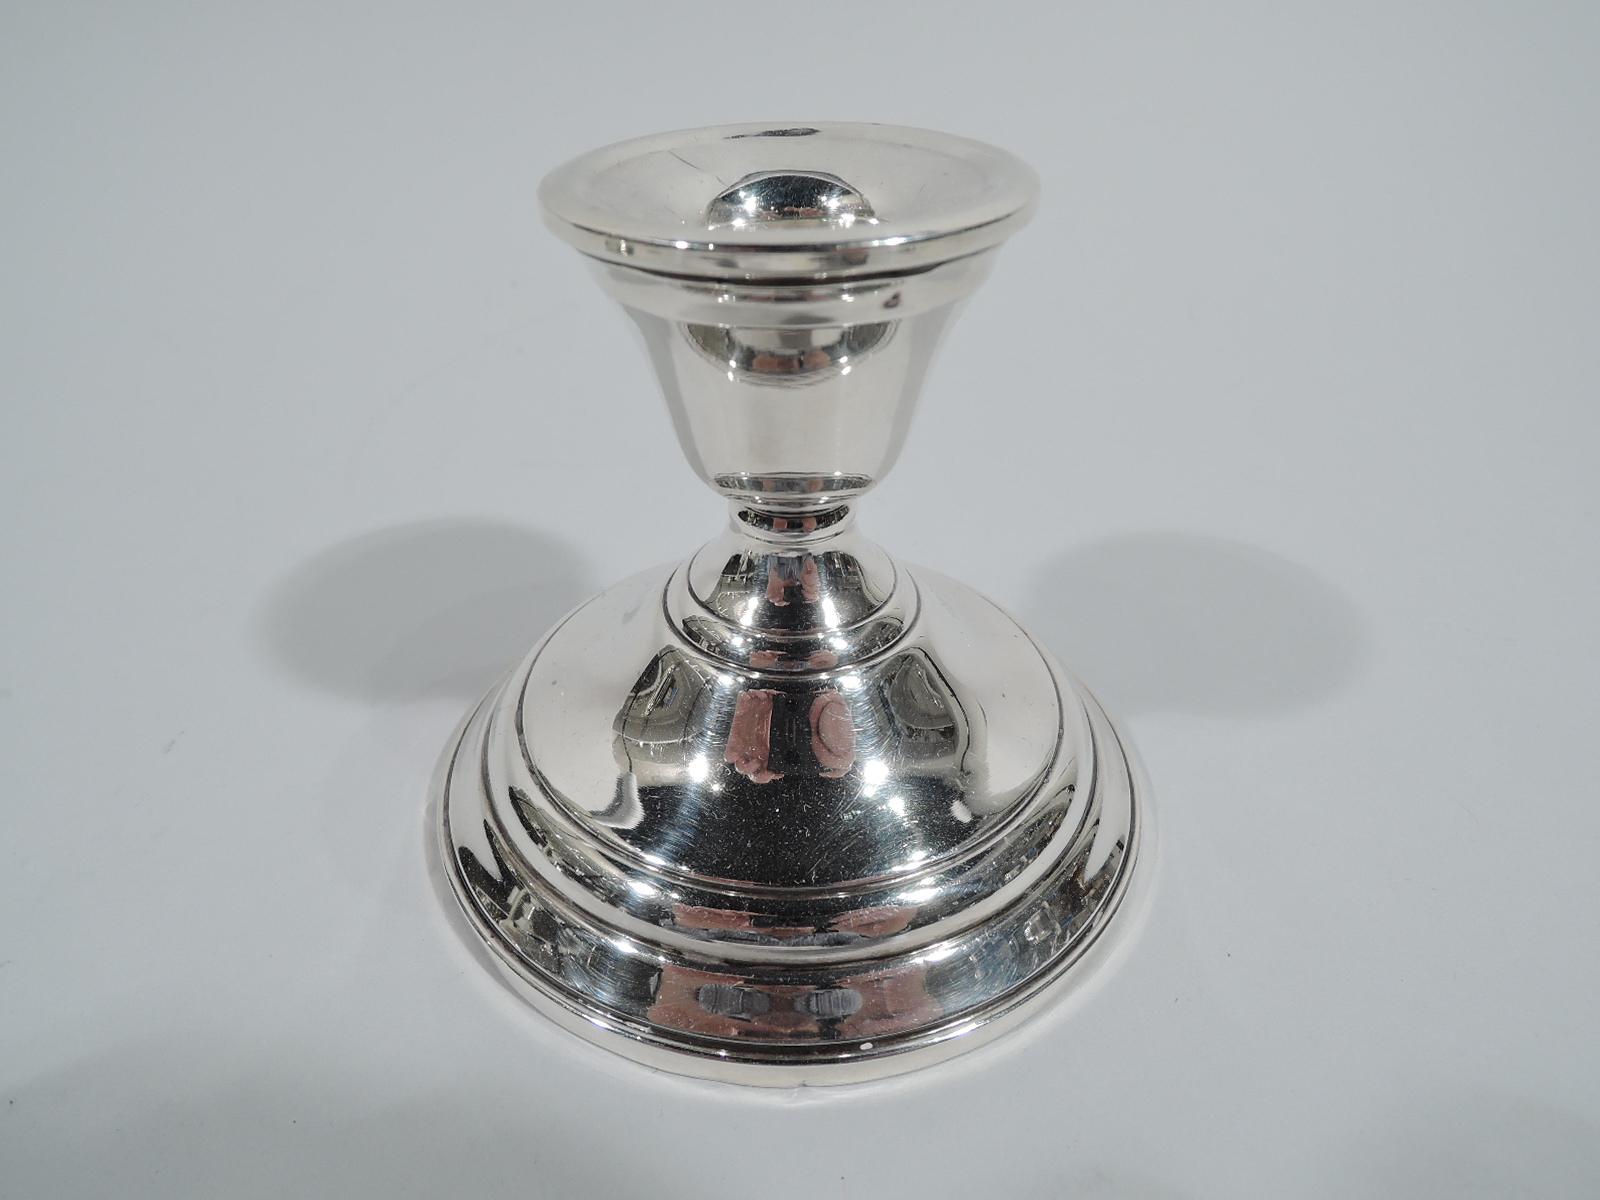 Pair of sterling silver low candlesticks. Made by Watrous (a division of International) in Wallingford, Conn. Tapering socket on stepped and domed foot. A handy housewarming gift. Fully marked including maker’s stamp and no. 13E. Weighted.